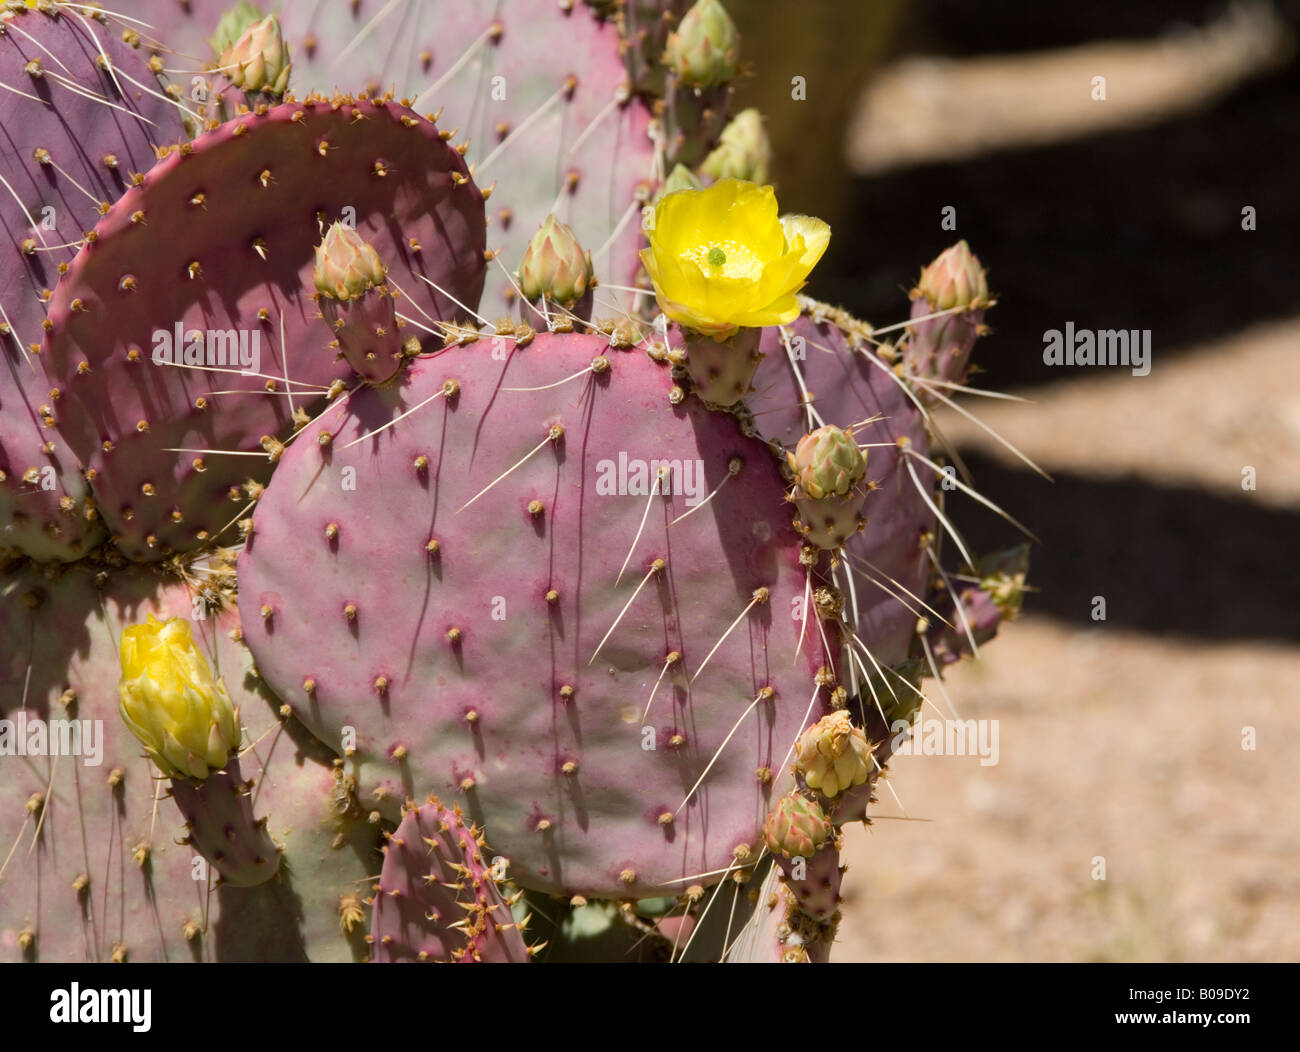 Santa Rita Prickly Pear Cactus High Resolution Stock Photography And Images Alamy